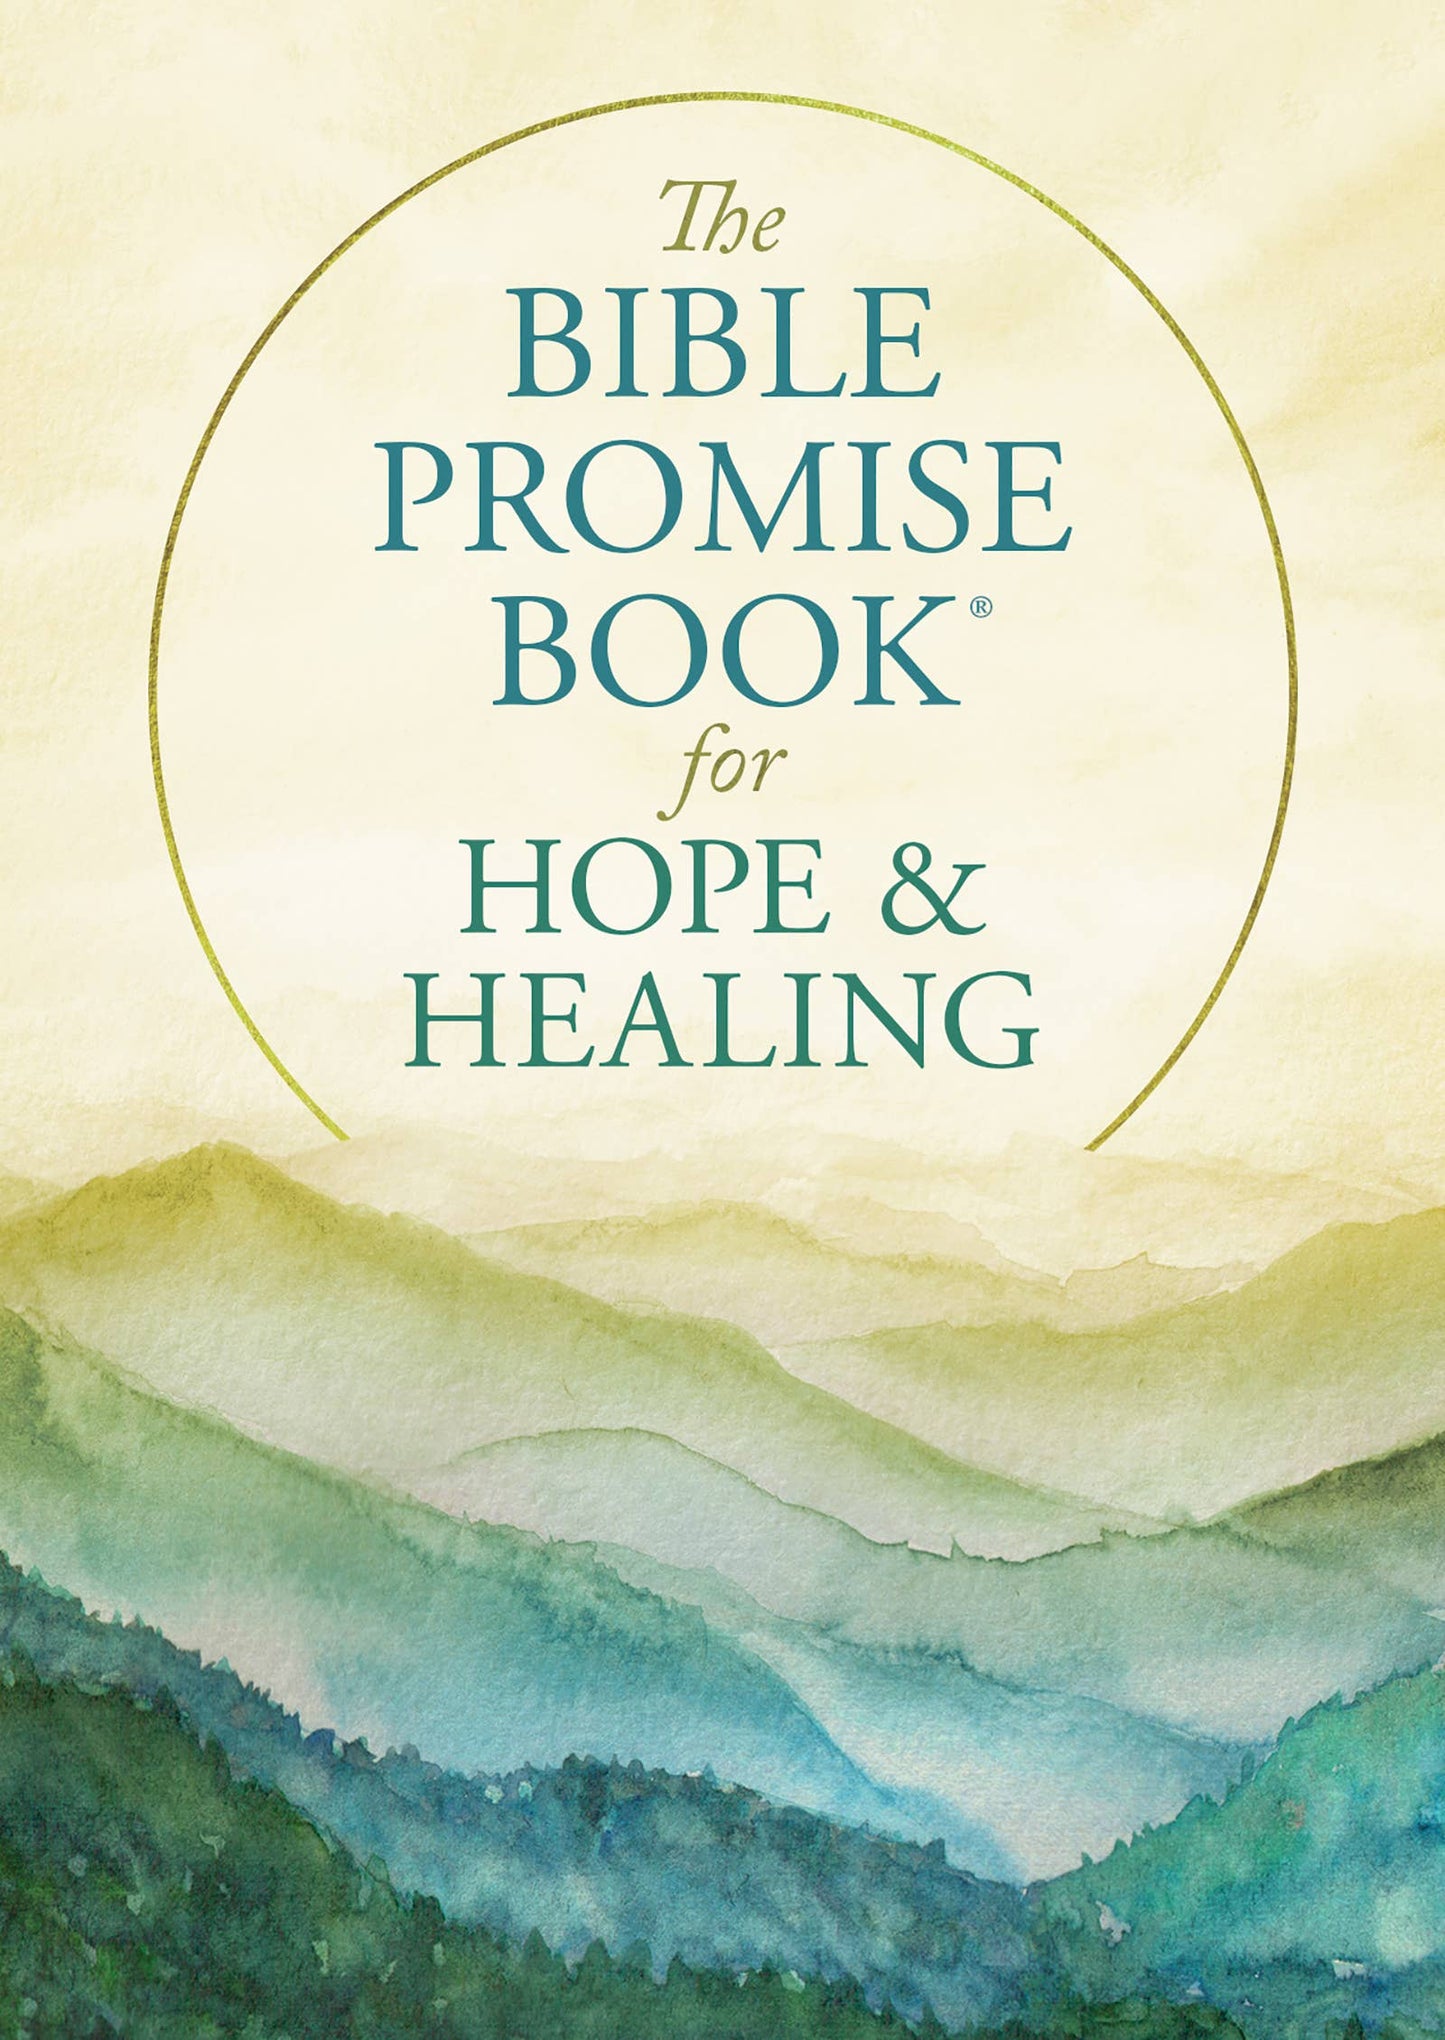 The Bible Promise Book for Hope & Healing